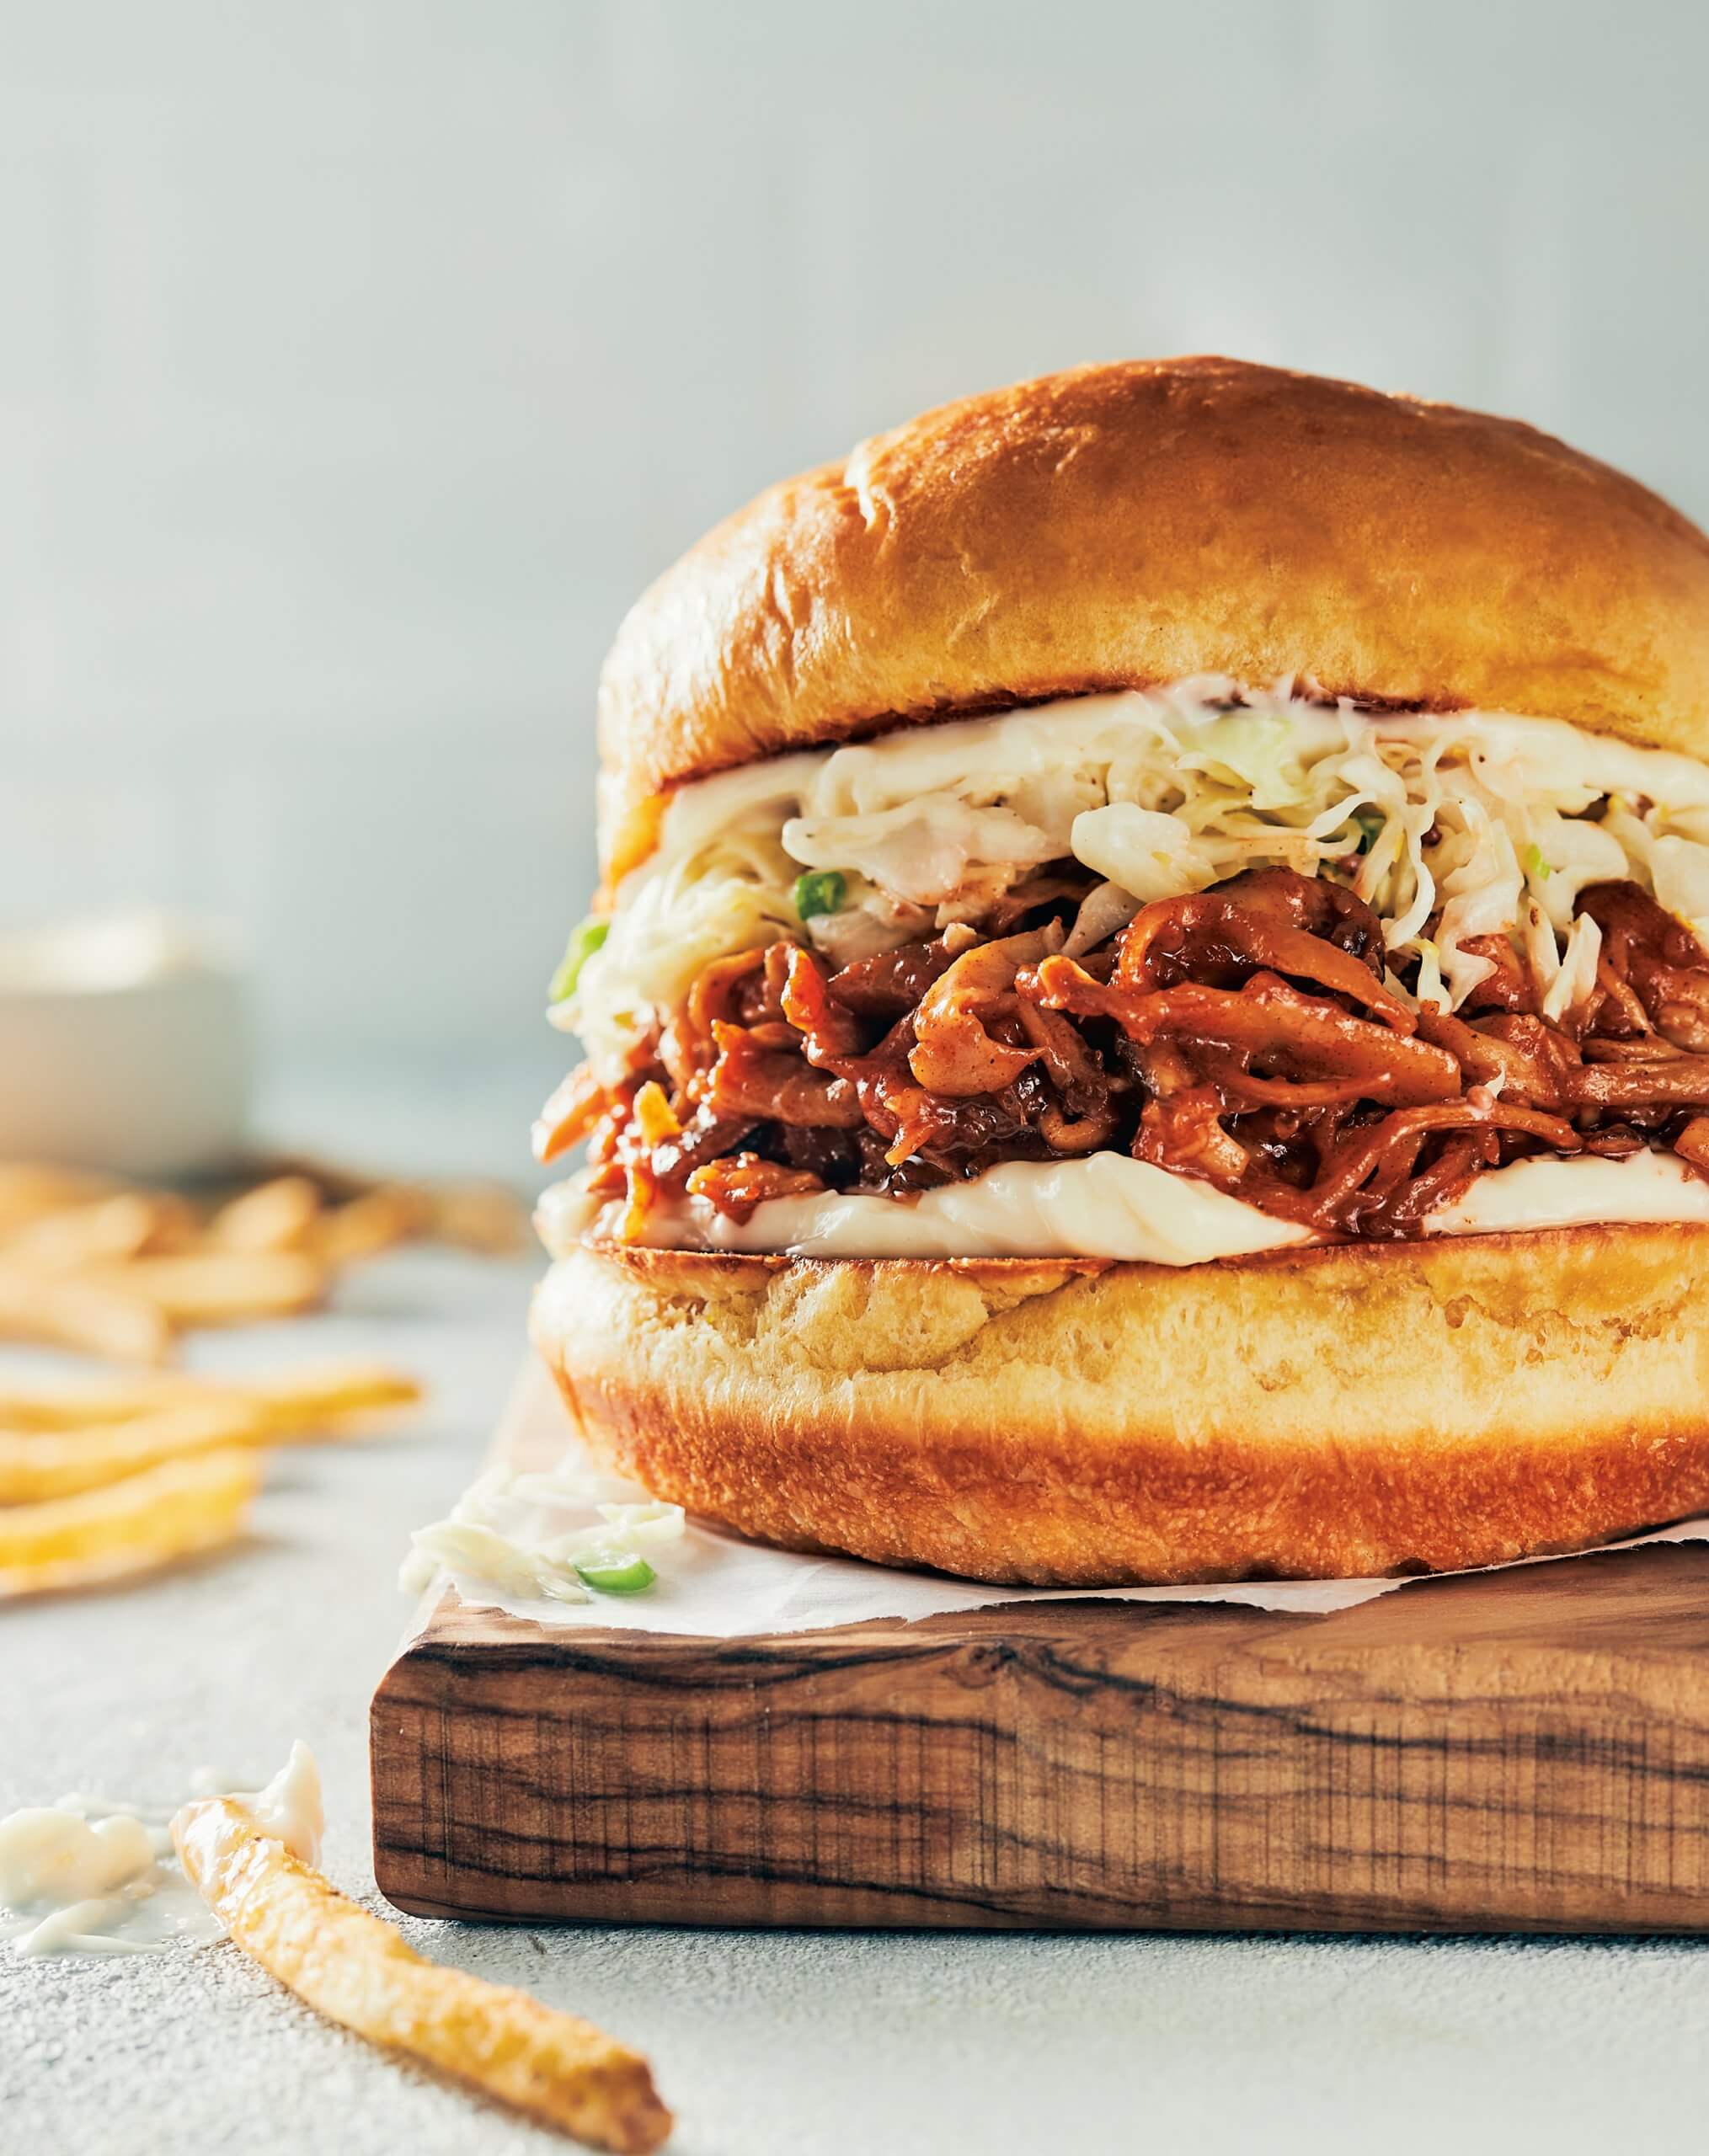 A hamburger bun with coleslaw and mushrooms prepared in the style of pulled pork.